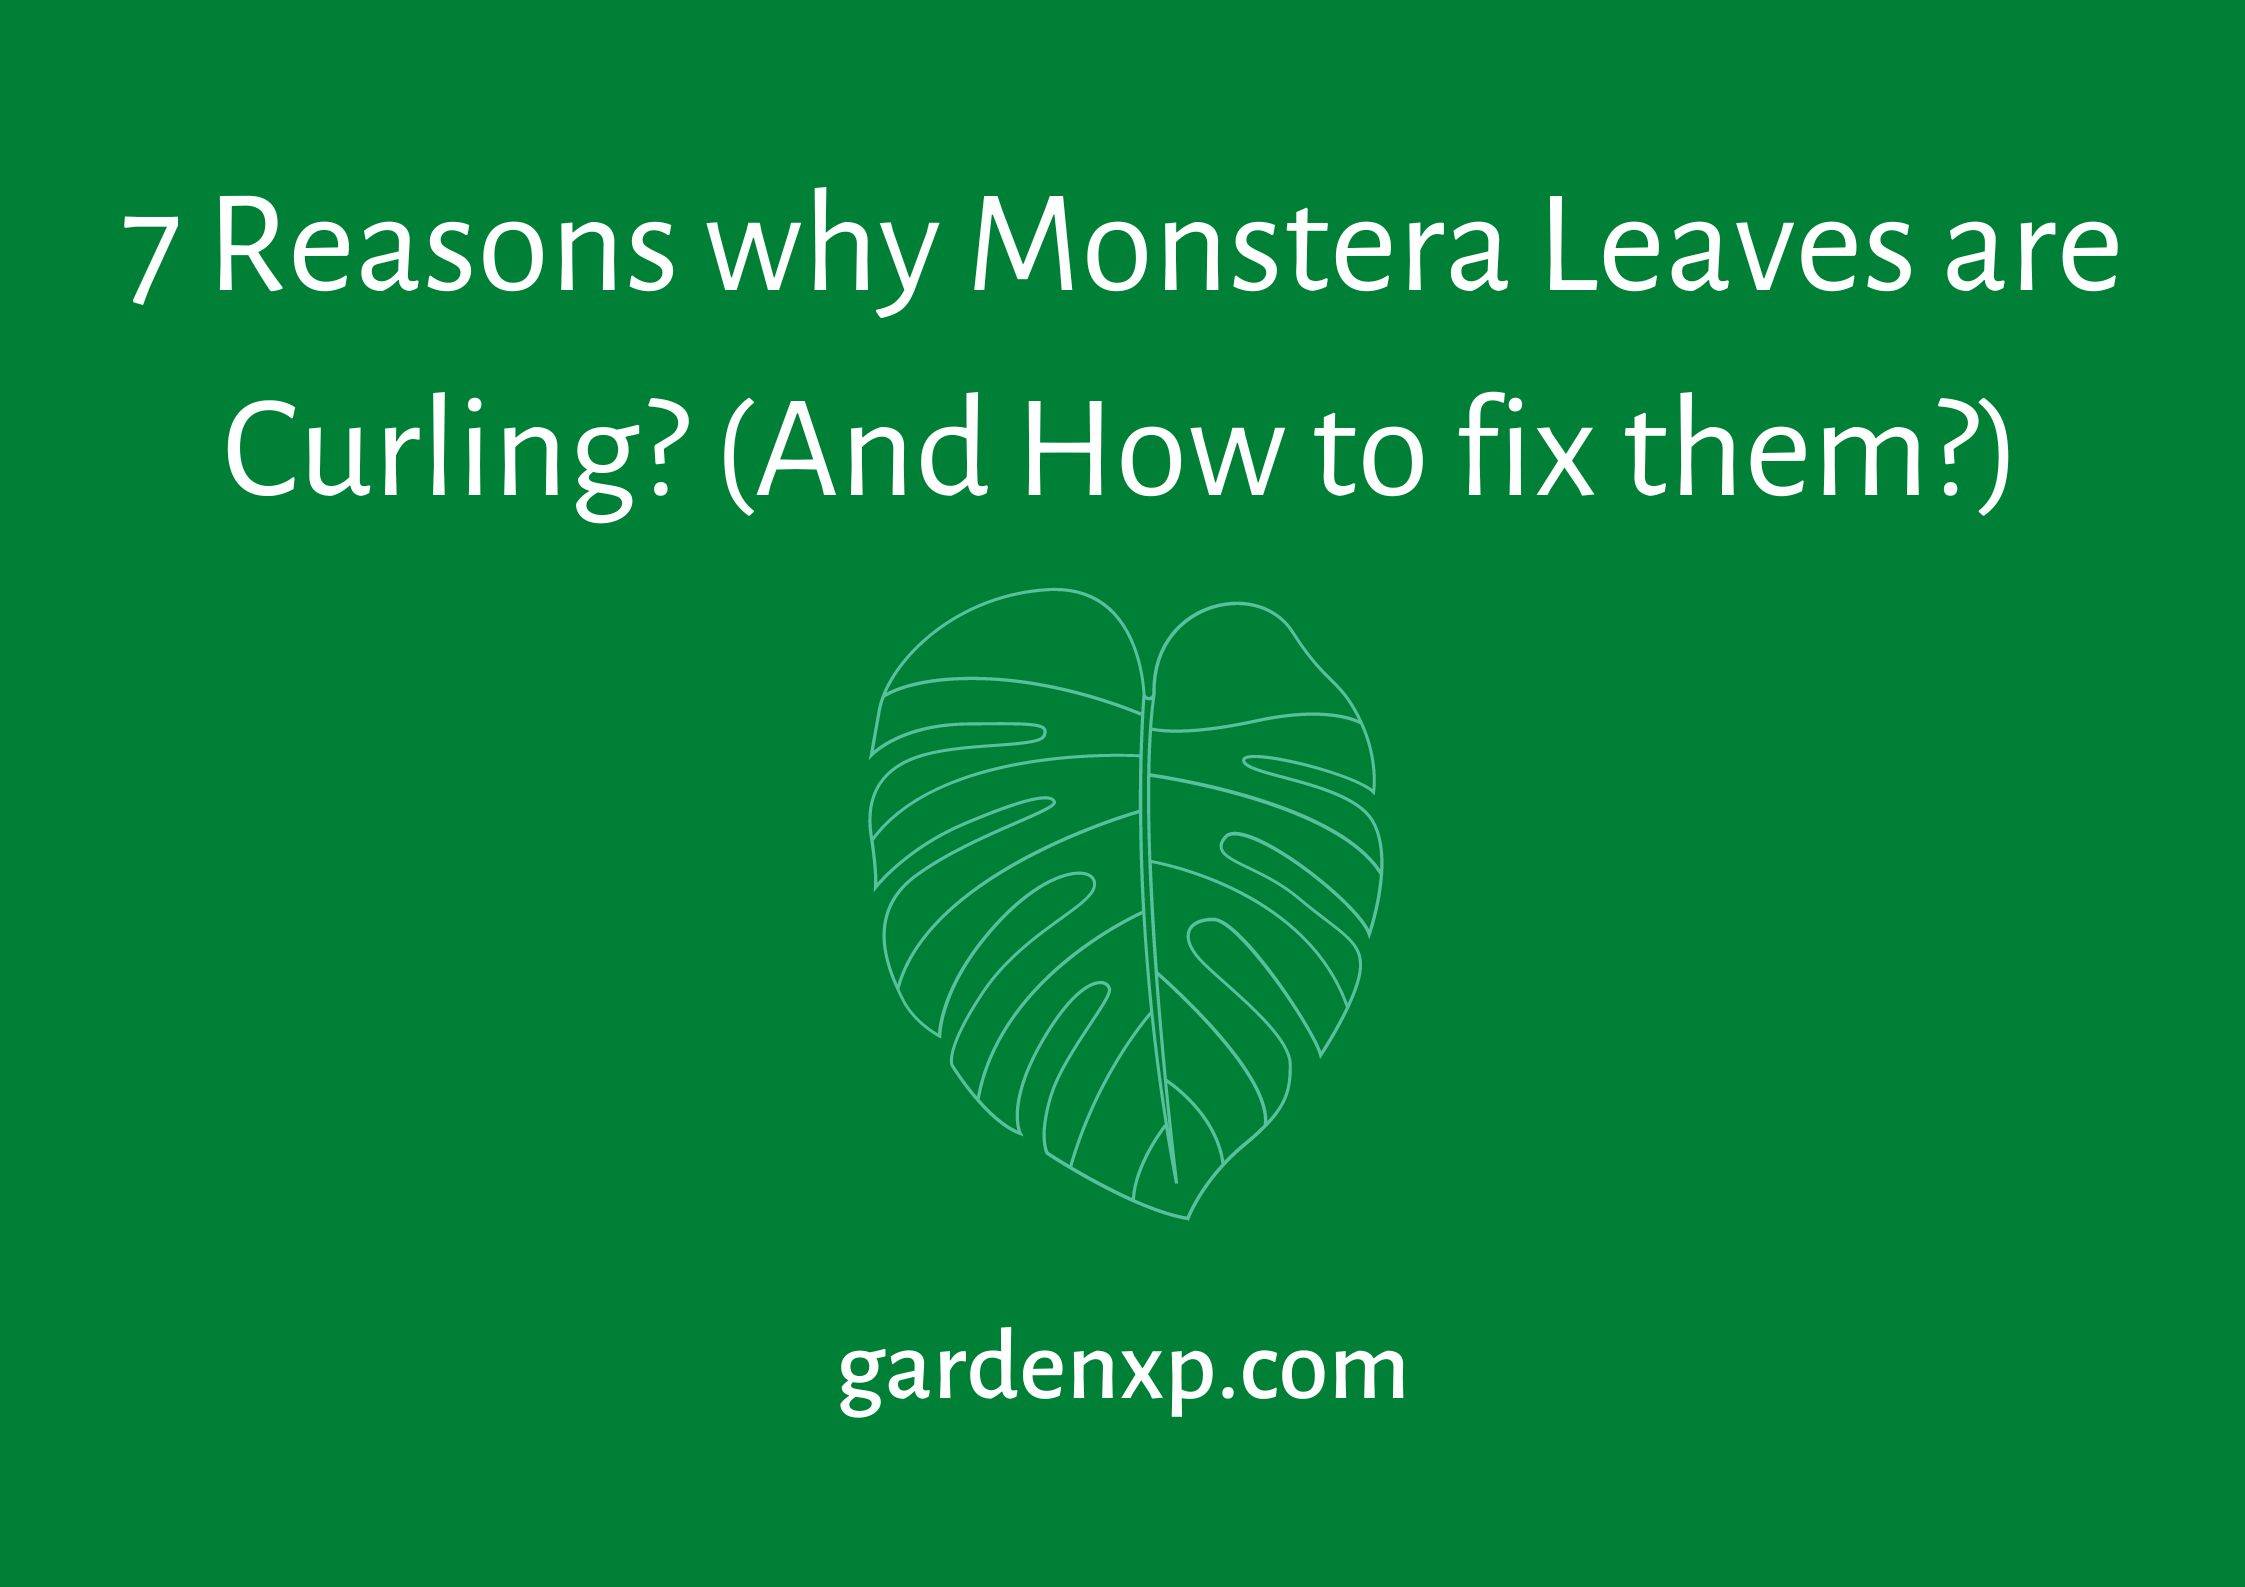 7 Reasons why Monstera Leaves are Curling? (And How to fix them?)